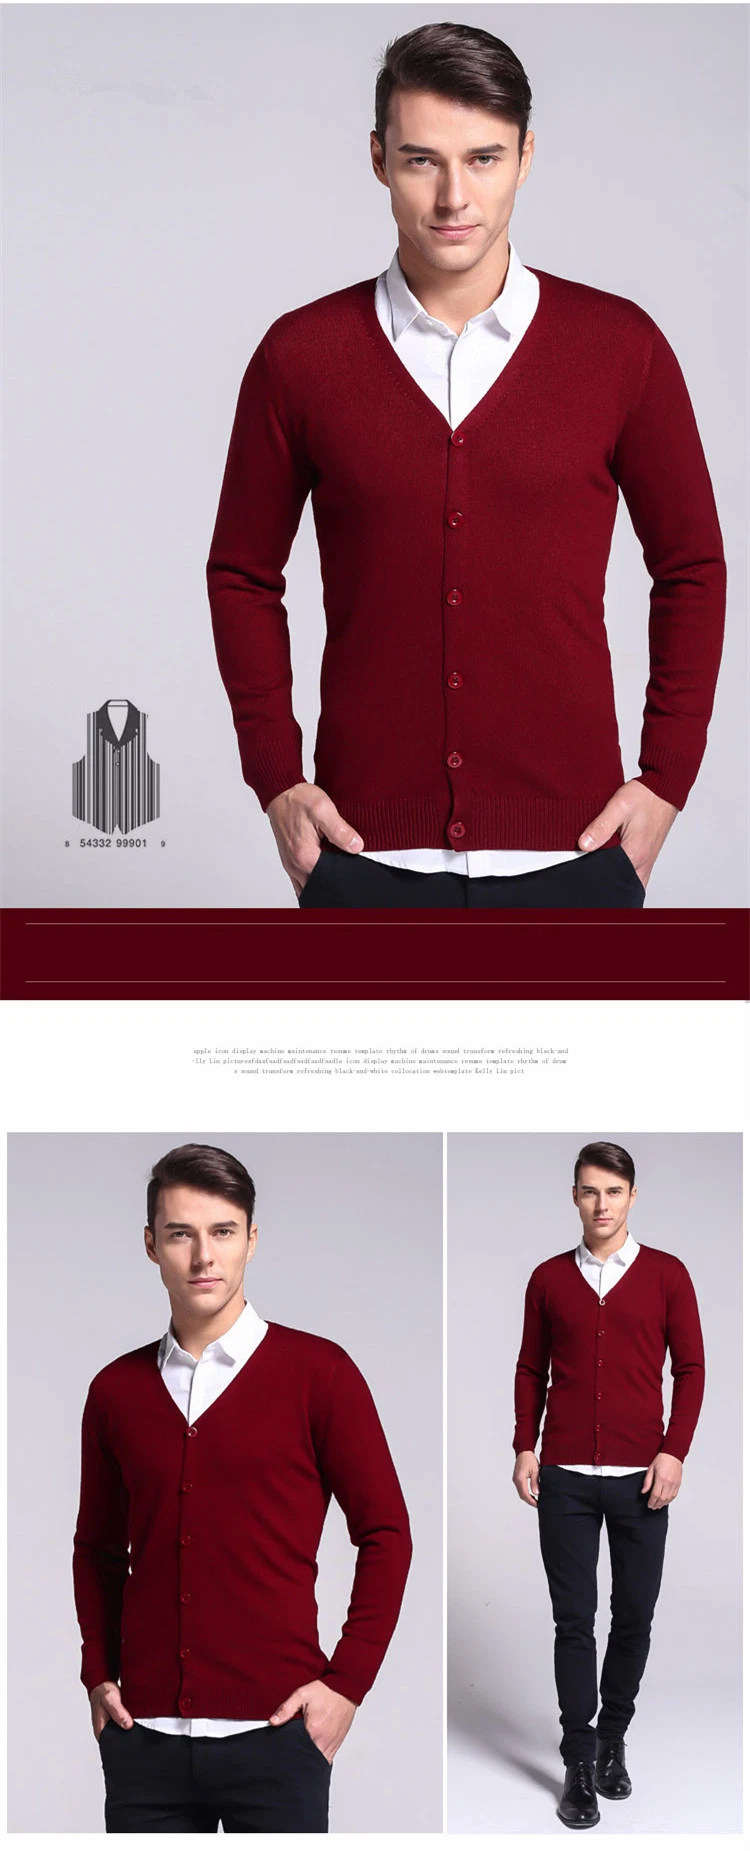 Hot Selling Cheap Price Men′s Cashmere Cardigan V-Neck Solid Color Large Size Slim Fit Long-Sleeved Office Business Sweater/Sweaters/Jerseys/Coat